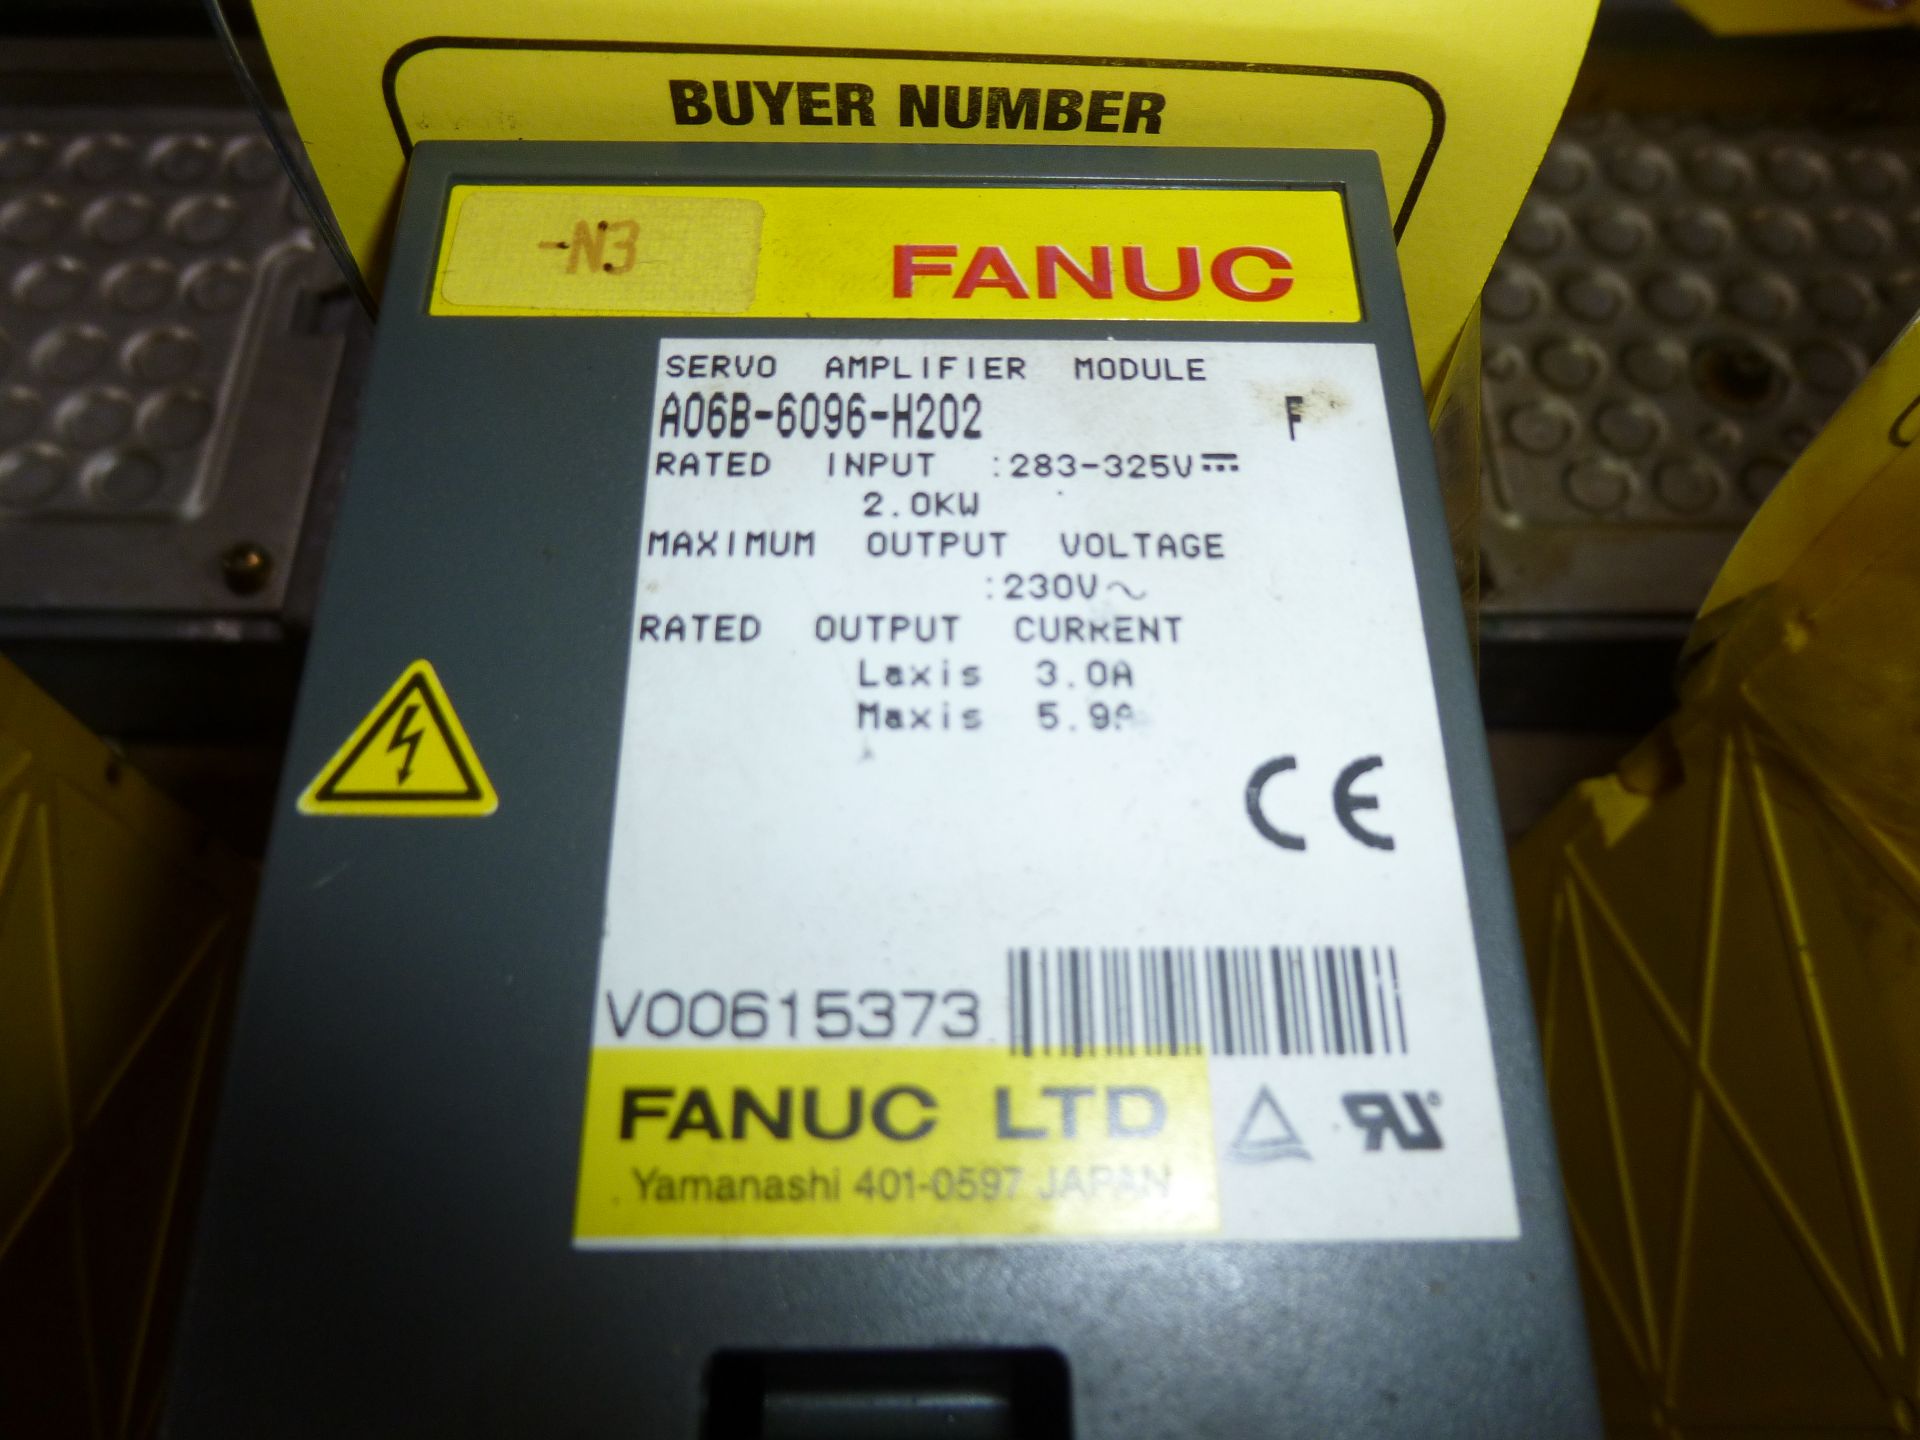 Fanuc servo amplifier module model A06B-6096-H202, as always with Brolyn LLC auctions, all lots - Image 2 of 2